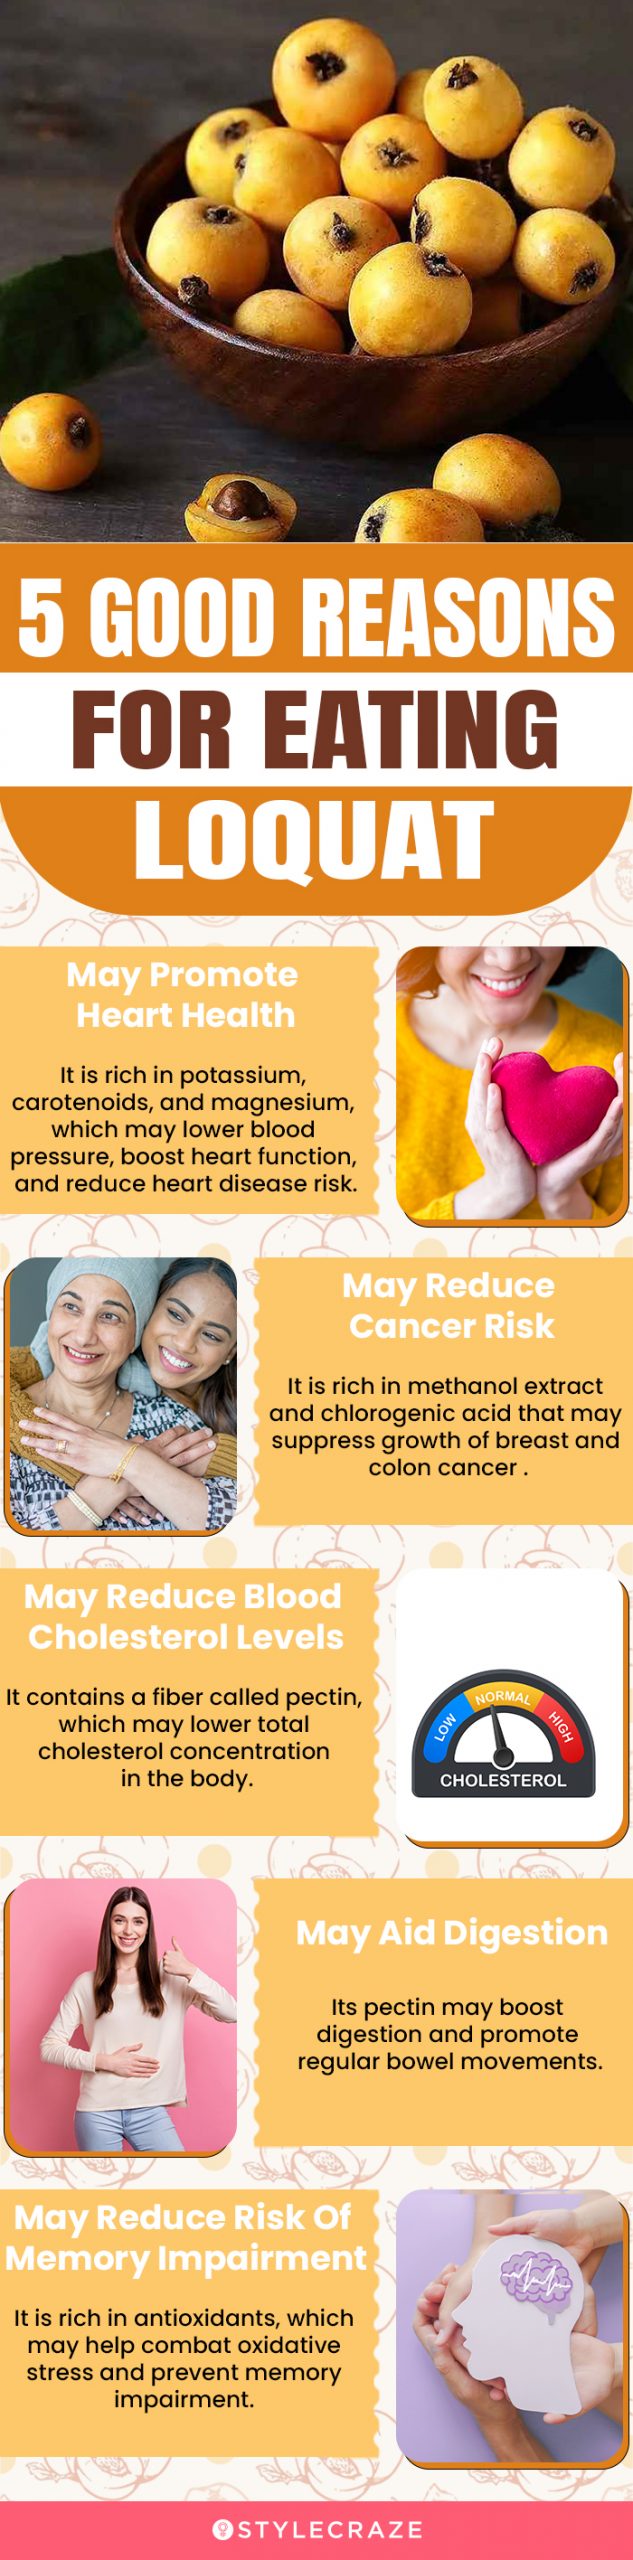 5 good reasons for eating loquat (infographic)